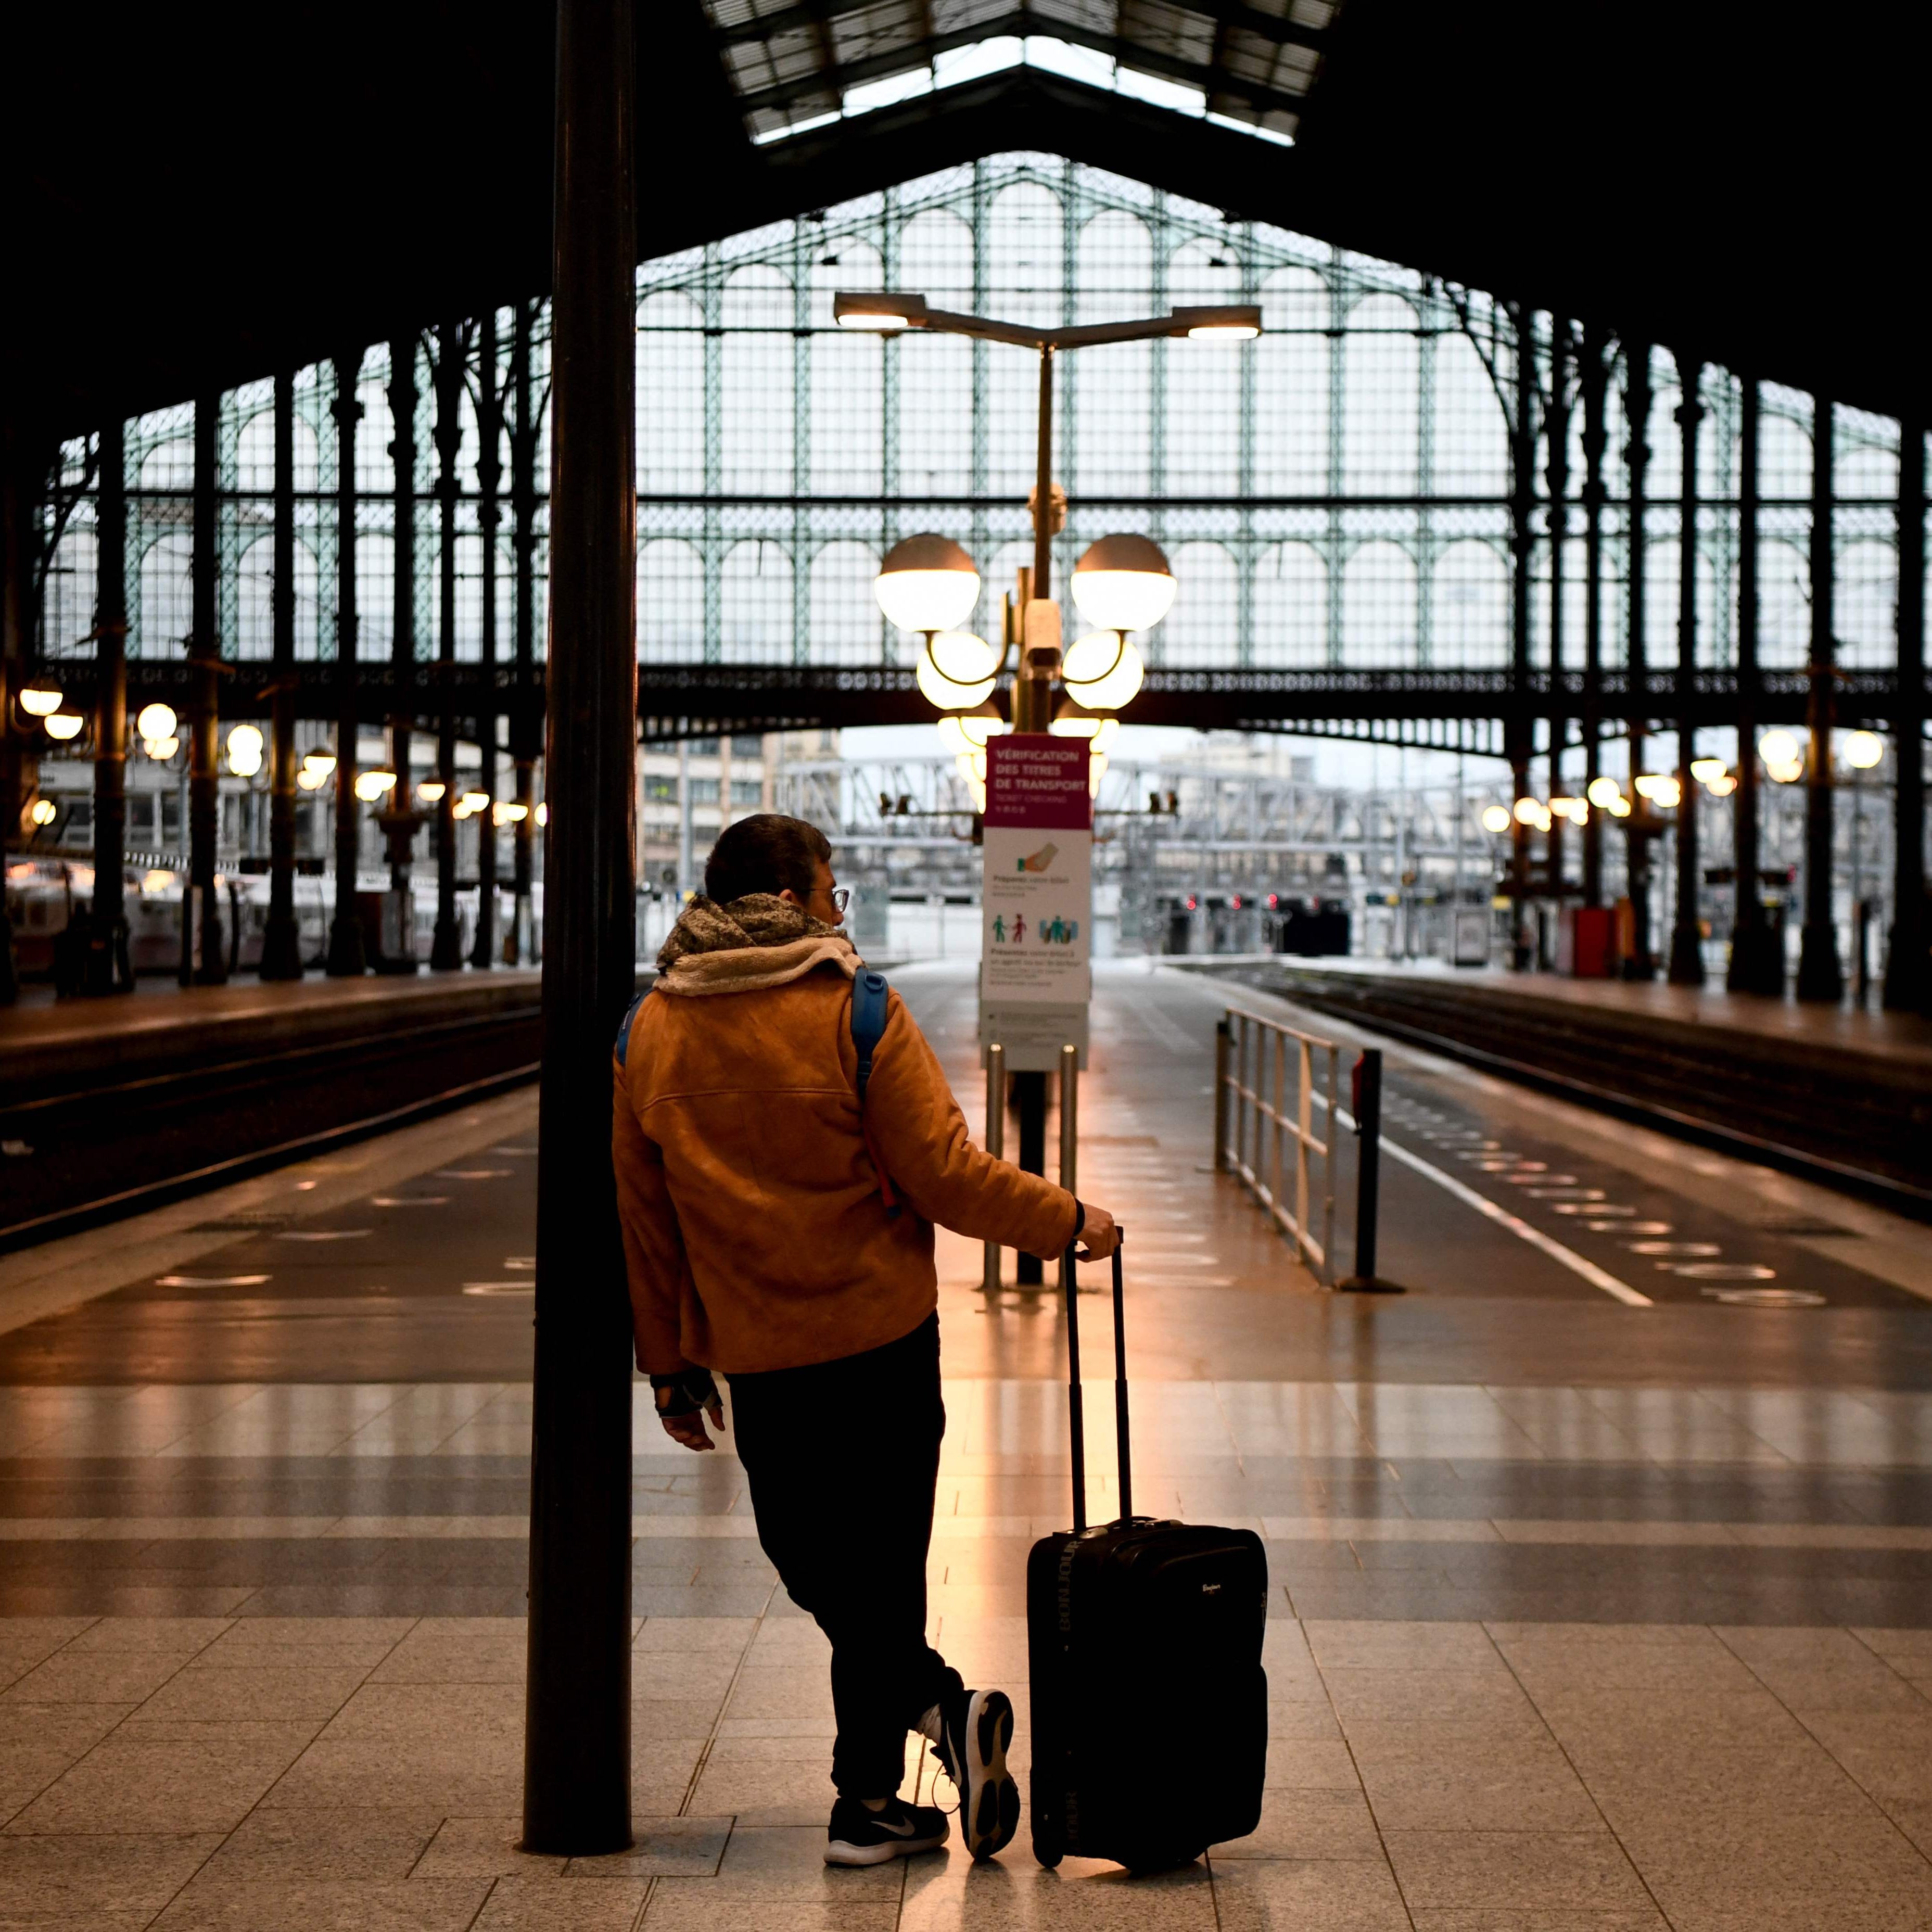 TOPSHOT - A traveller waits in front of platforms at Gare du Nord train station in Paris on a new day of nationwide strikes and protests against the government's pension reform plan on March 23, 2023. - France braced for more transport woes and a new day of nationwide protests on March 23, 2023 after a defiant President Emmanuel Macron pledged to implement a contentious pensions overhaul by year-end. (Photo by Christophe ARCHAMBAULT / AFP) (Photo by CHRISTOPHE ARCHAMBAULT/AFP via Getty Images) ORIG FILE ID:   AFP_33BV7VM.jpg